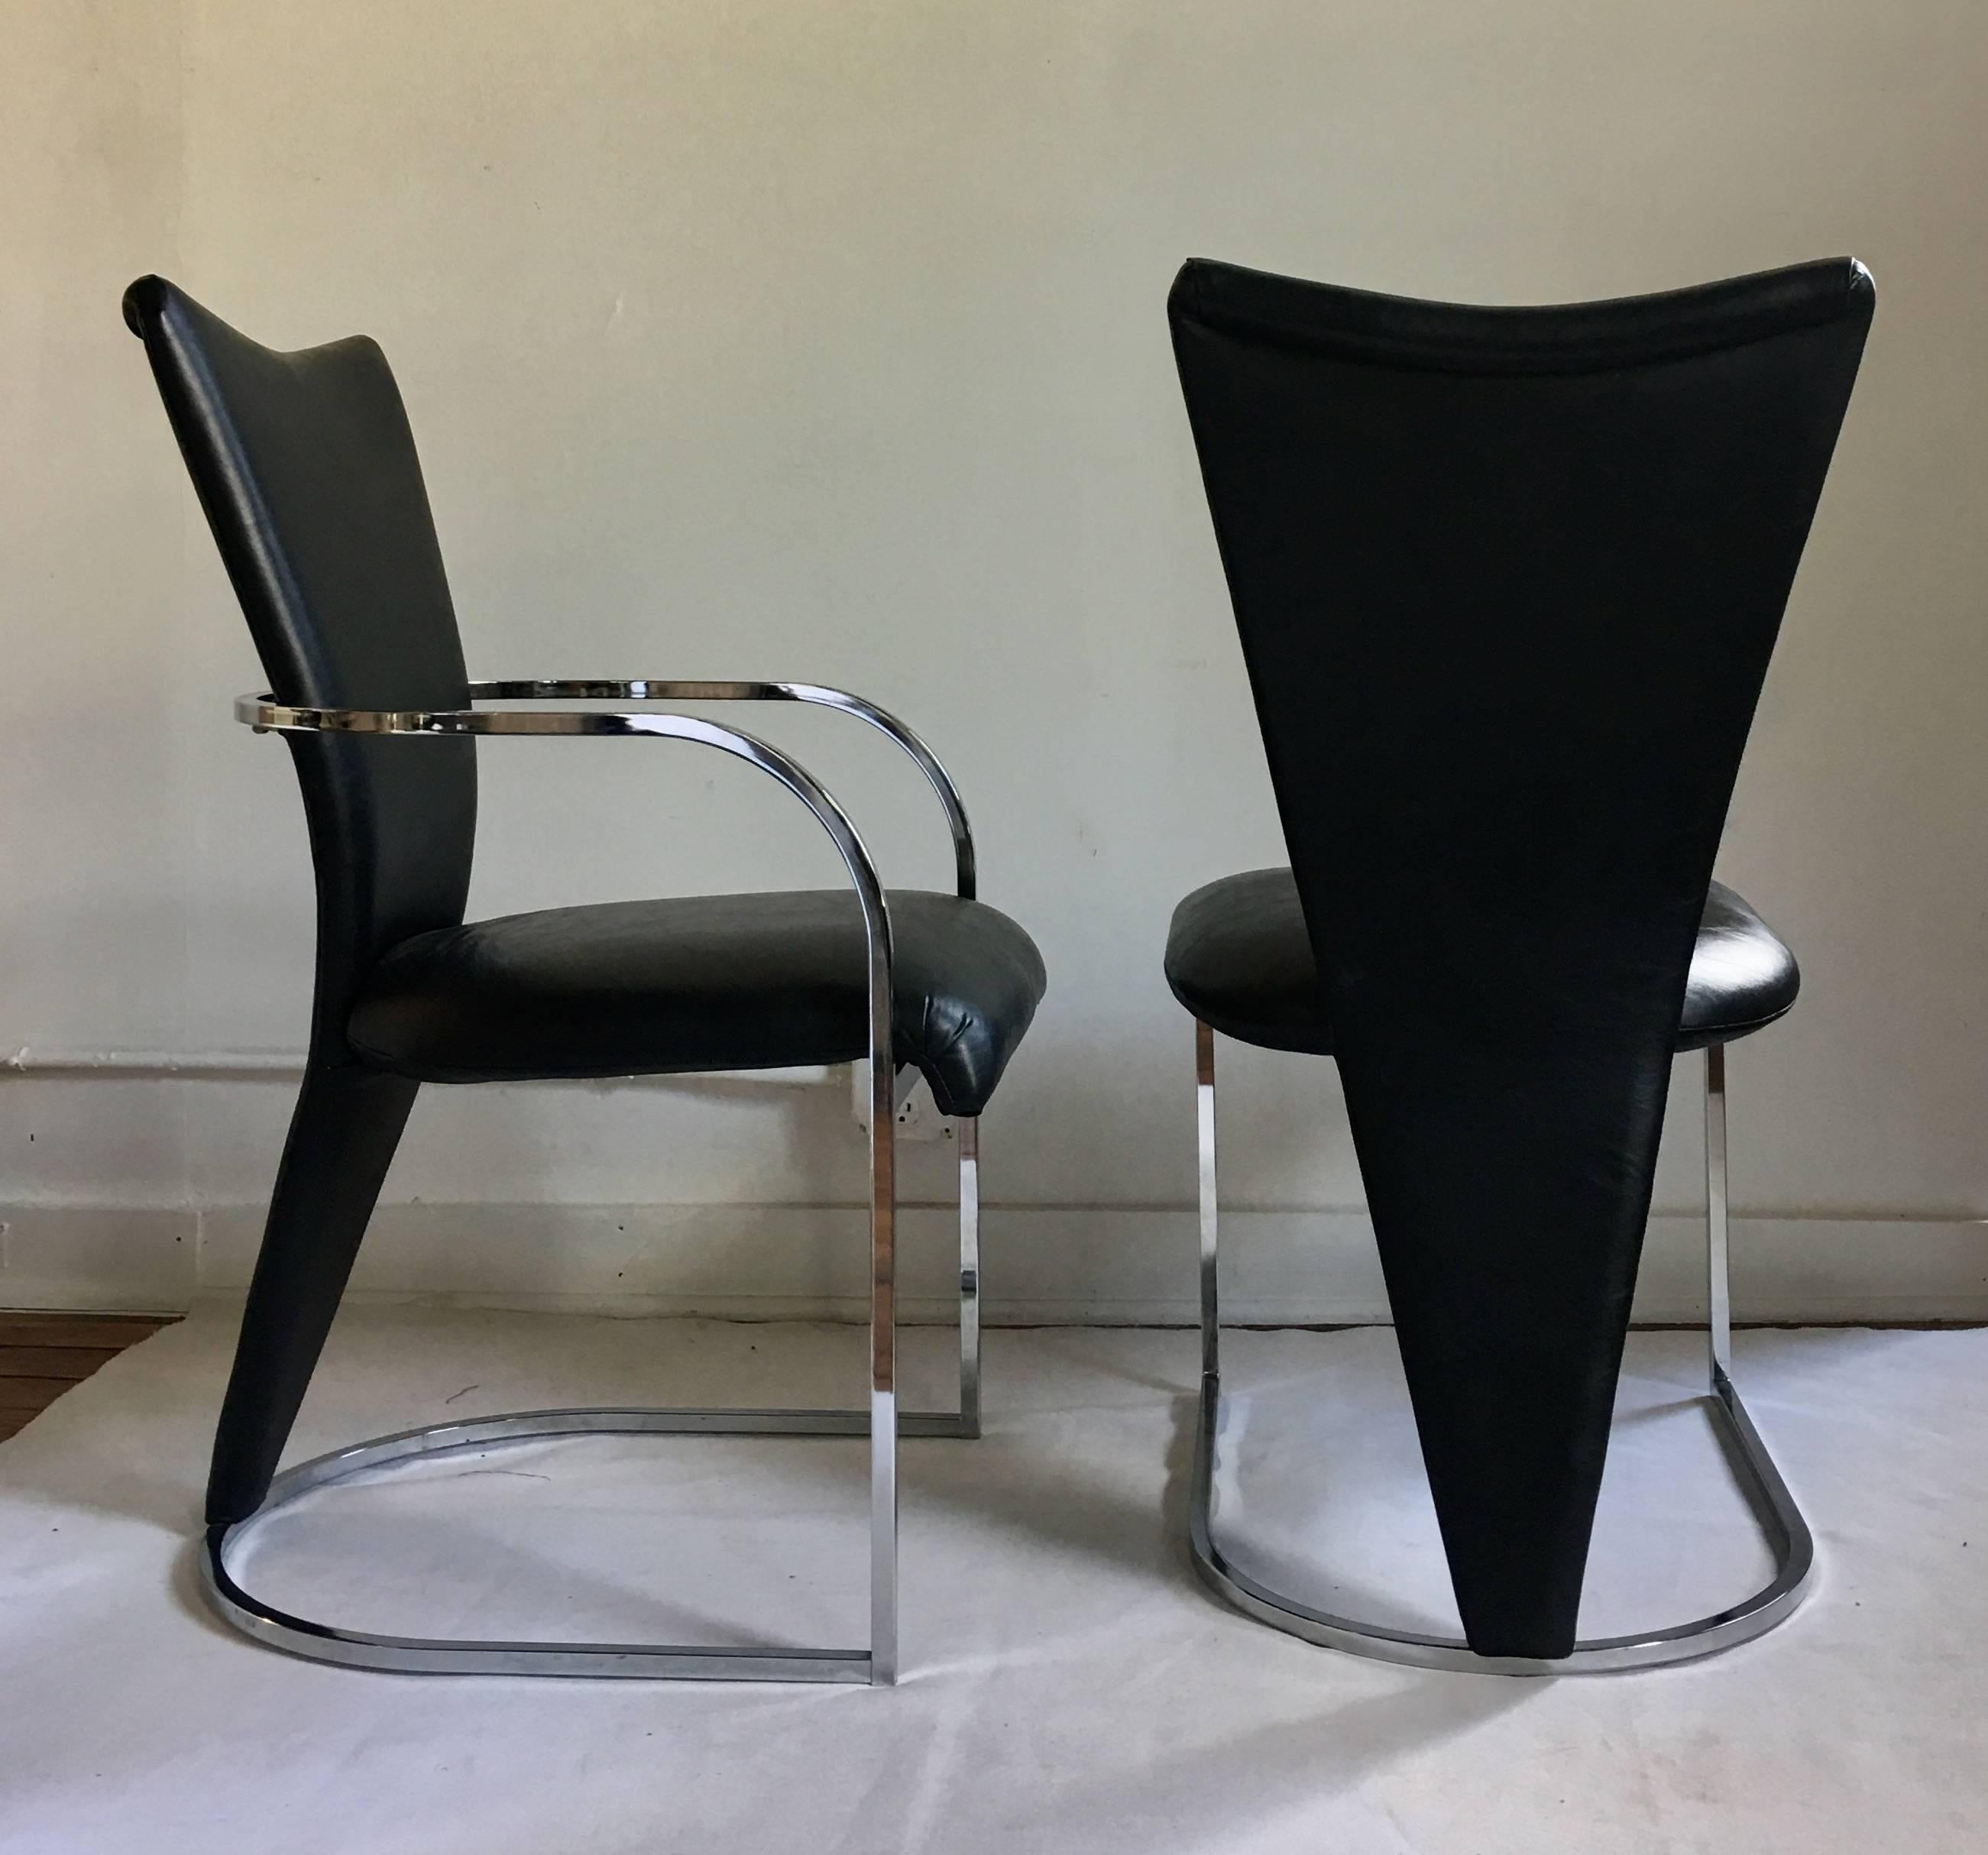 Set of six postmodern chromed steel dining chairs by DIA, Design Institute America. Set includes two arm chairs and four armless side chairs. Influenced by the designs of the Memphis Group, these sculptural chairs feature a curved triangular rolled